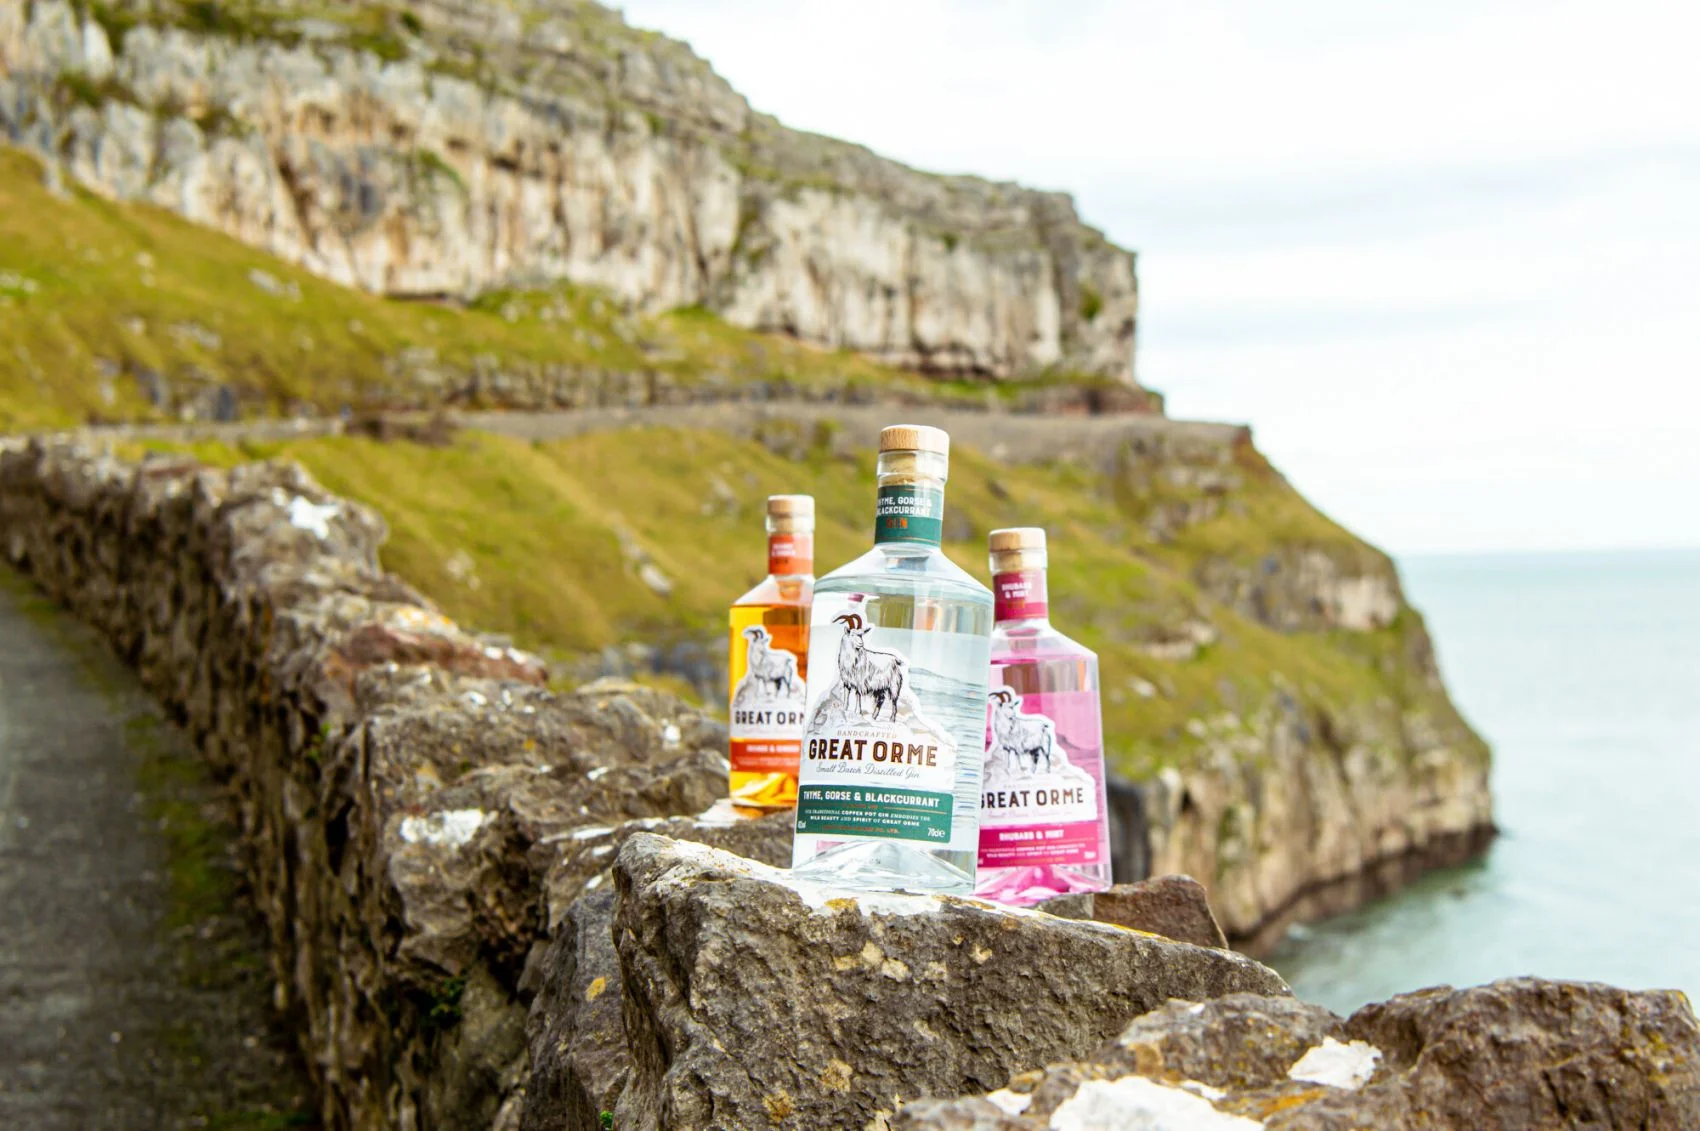 Great Orme Gin